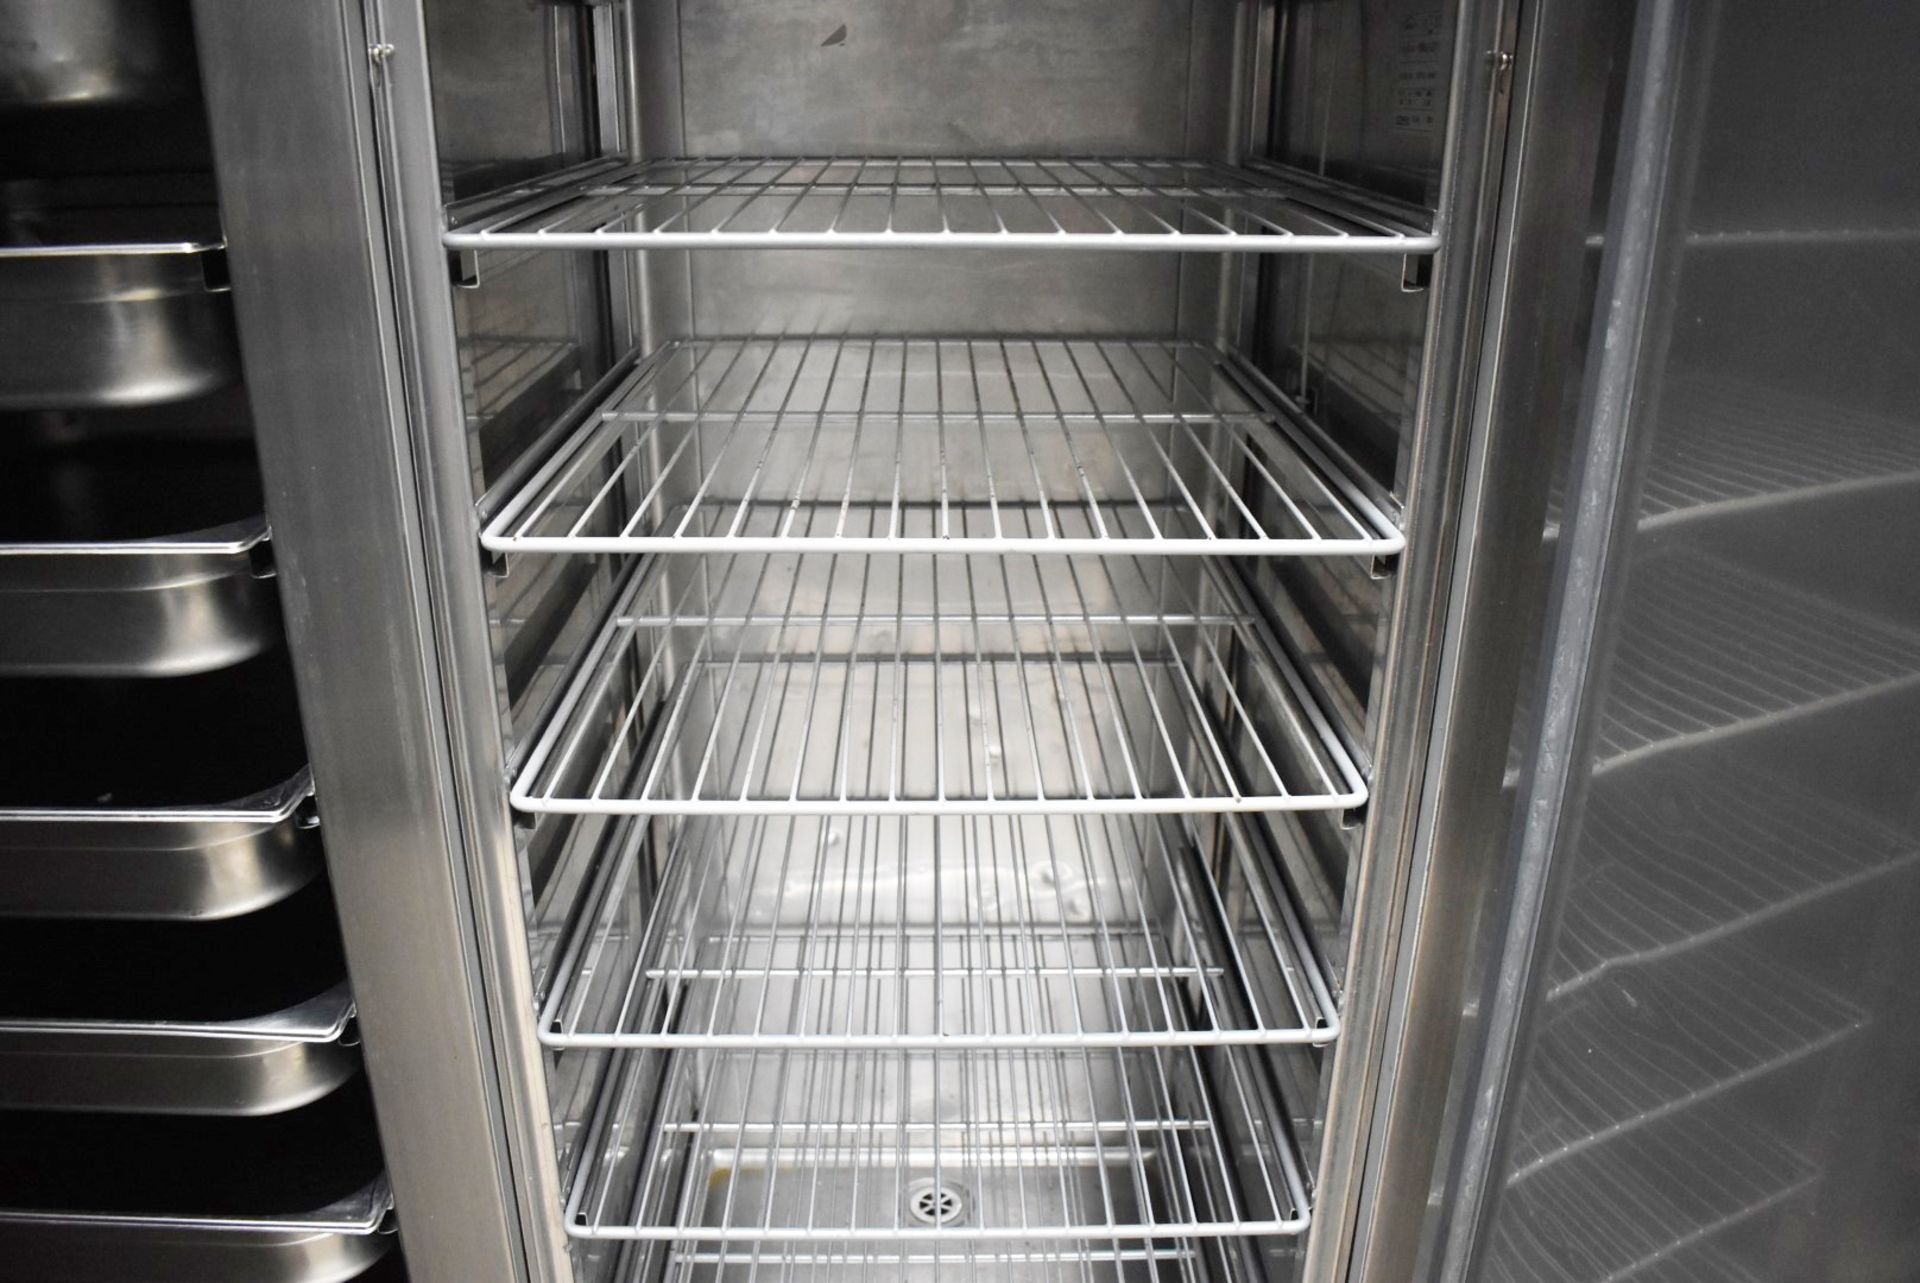 1 x Williams Double Door Upright Side by Side Refrigerator With Gastro Food Trays and Storage - Image 12 of 18